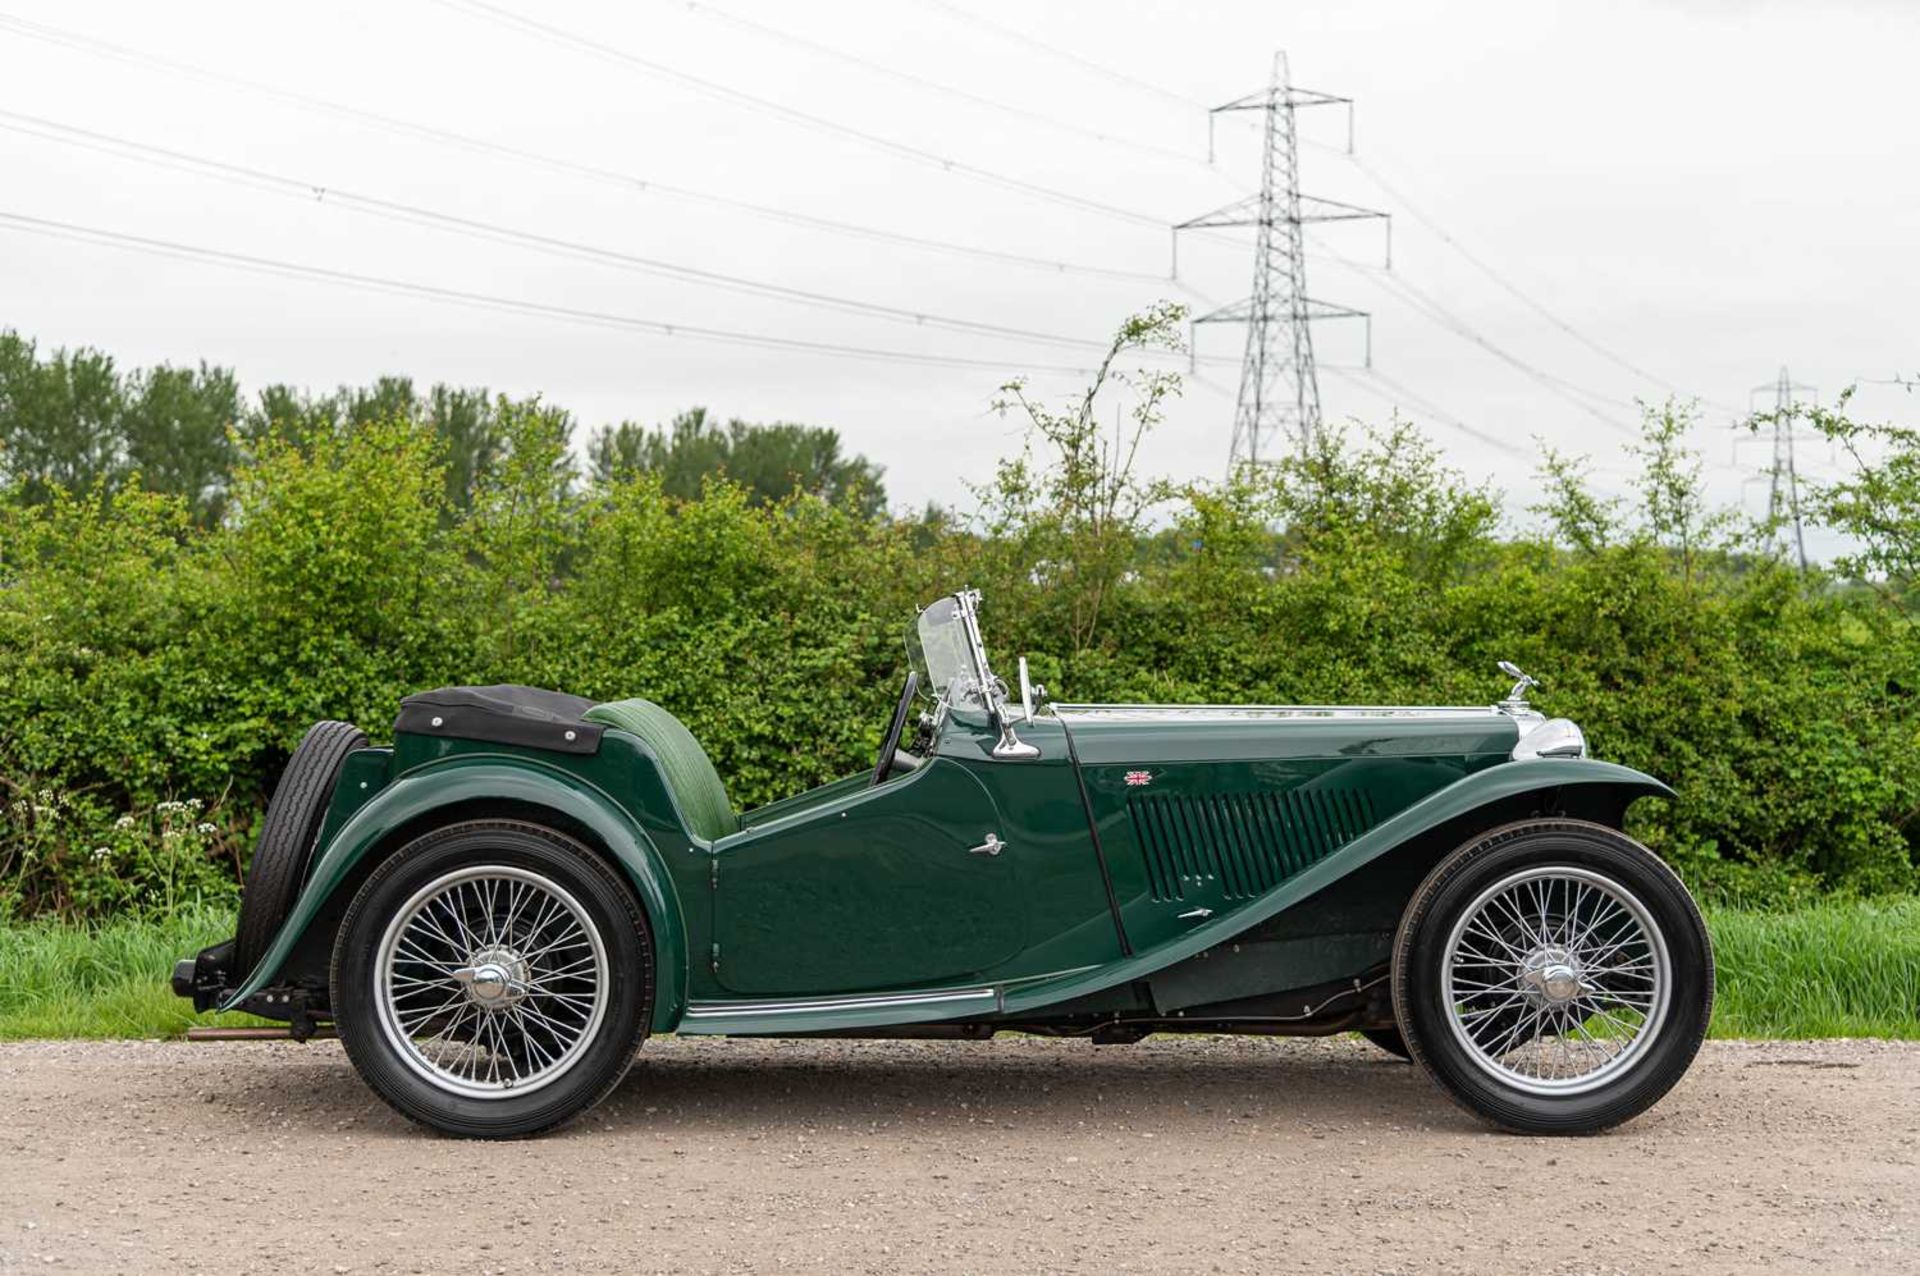 1947 MG TC Midget  Fully restored, right-hand-drive UK home market example - Image 9 of 76